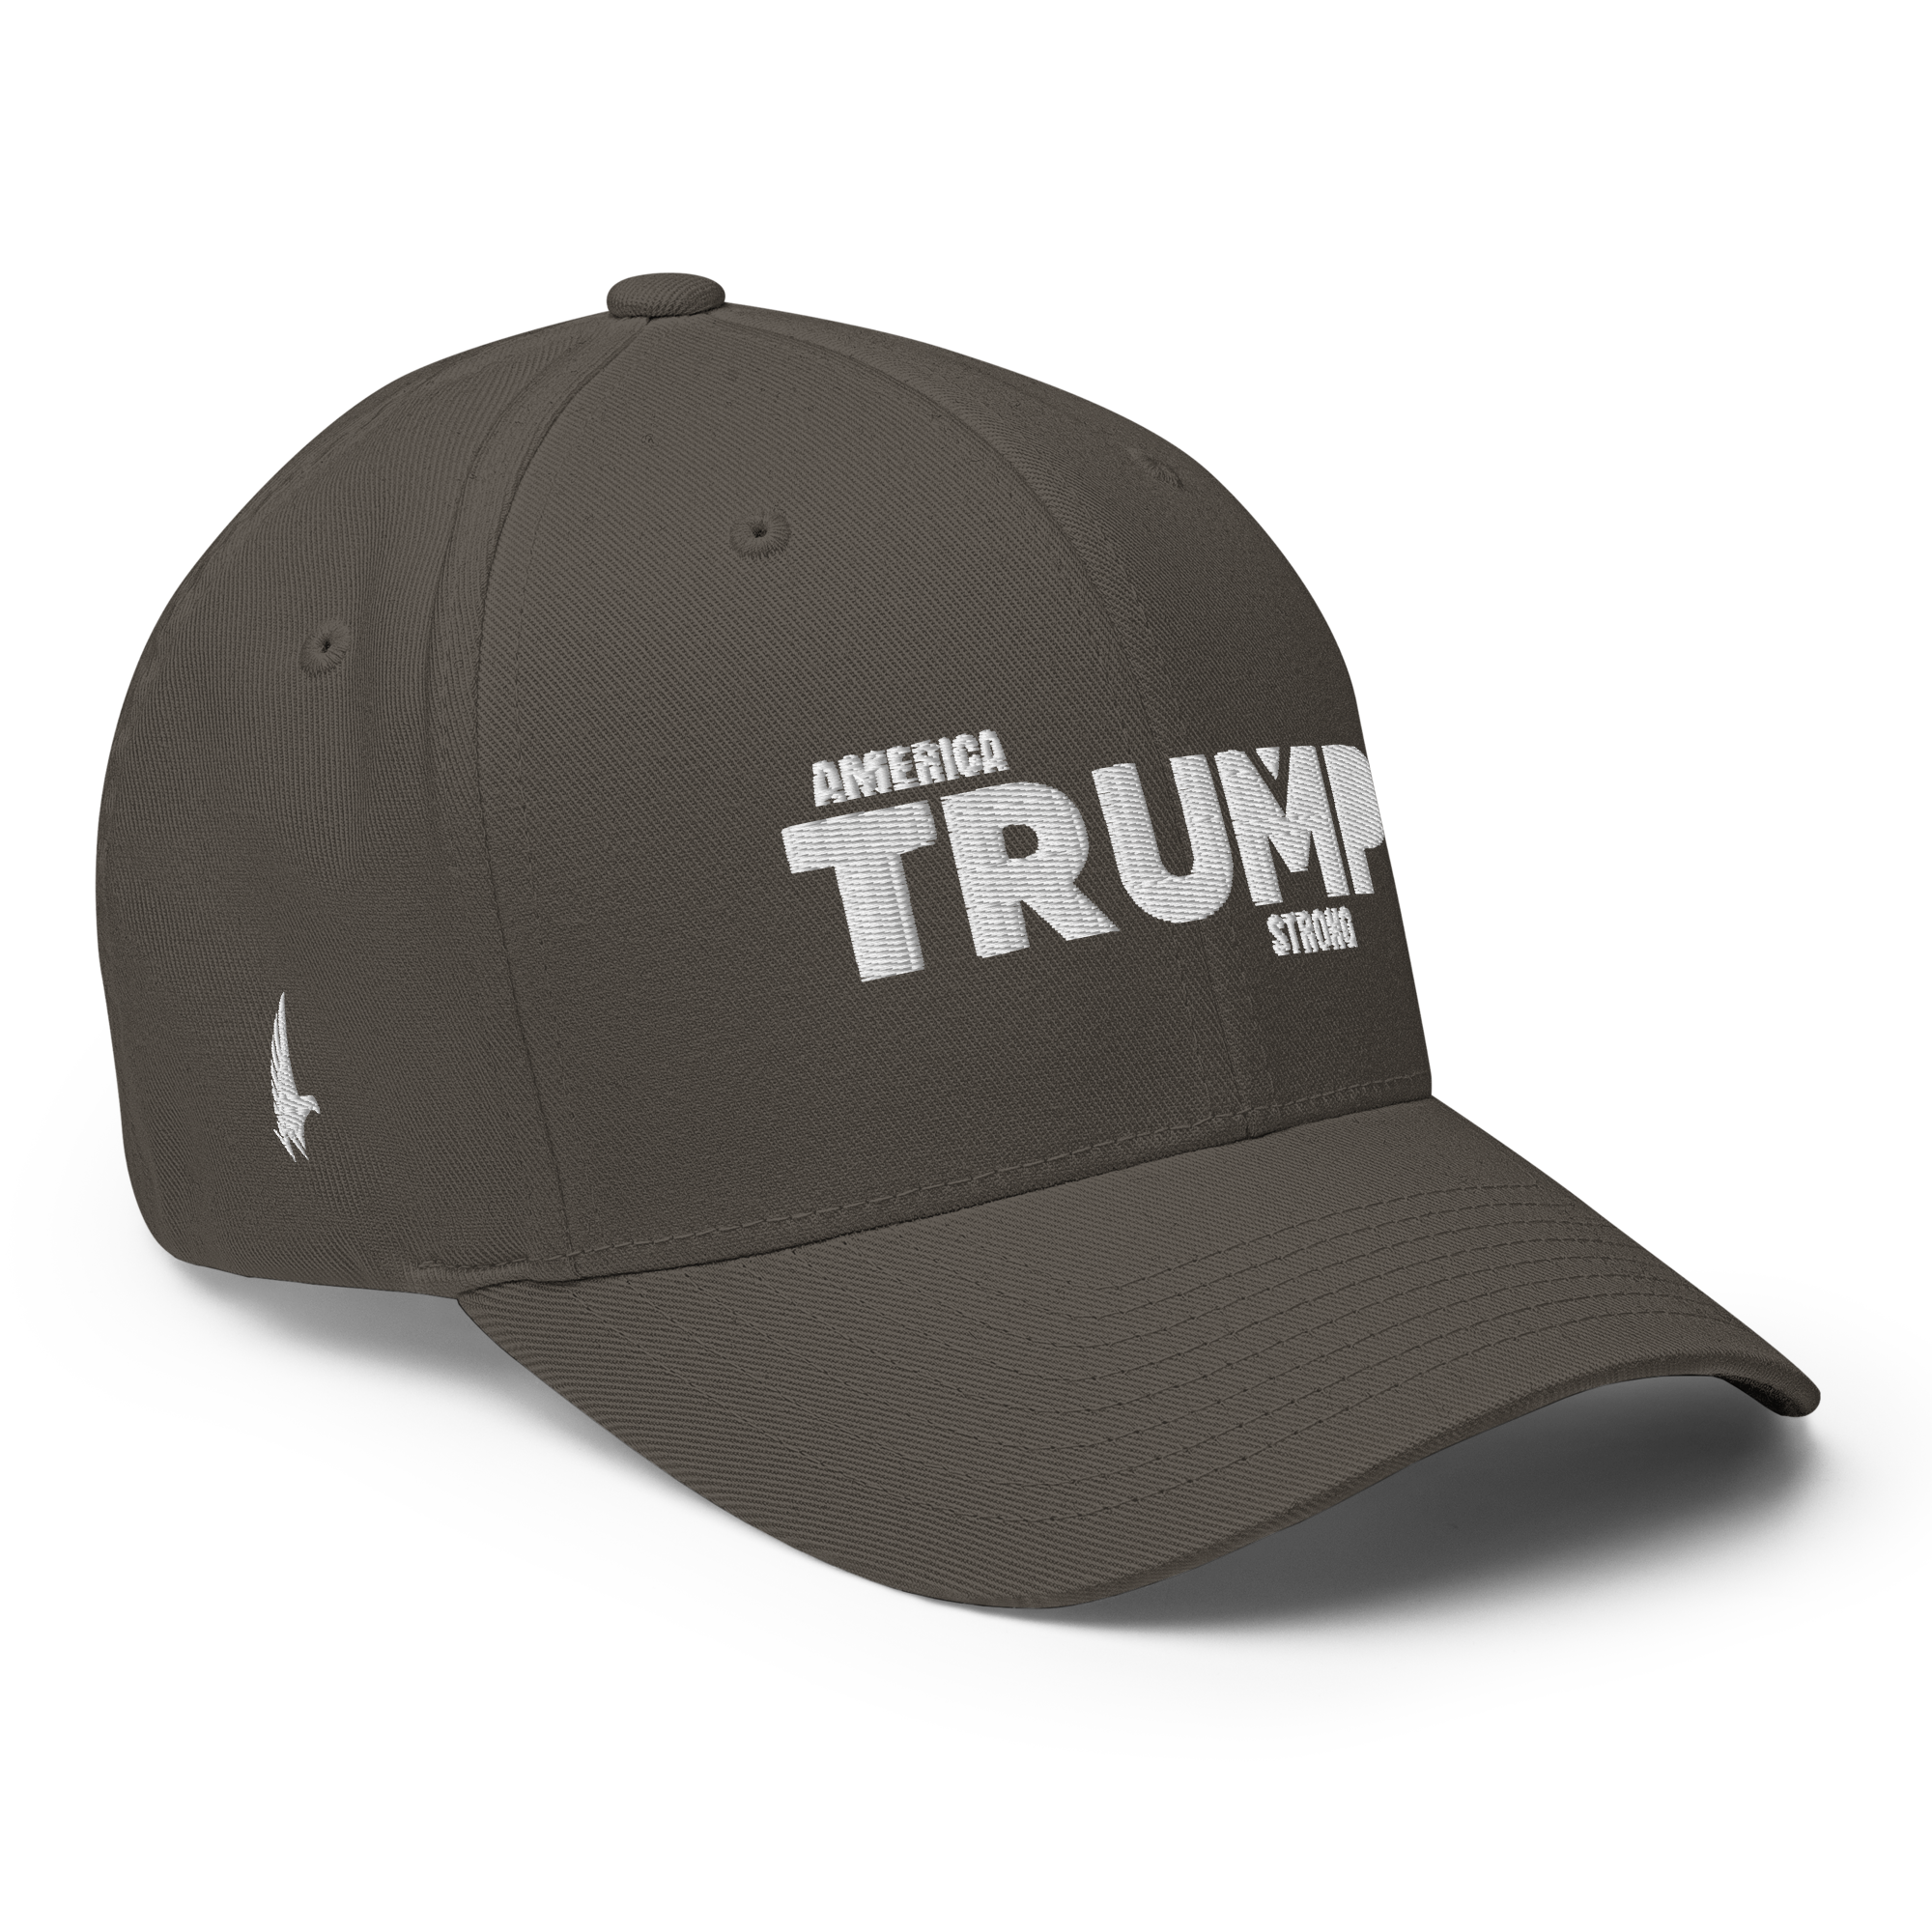 America Strong Trump Flexfit Hat - Charcoal Grey Fitted - Loyalty Vibes